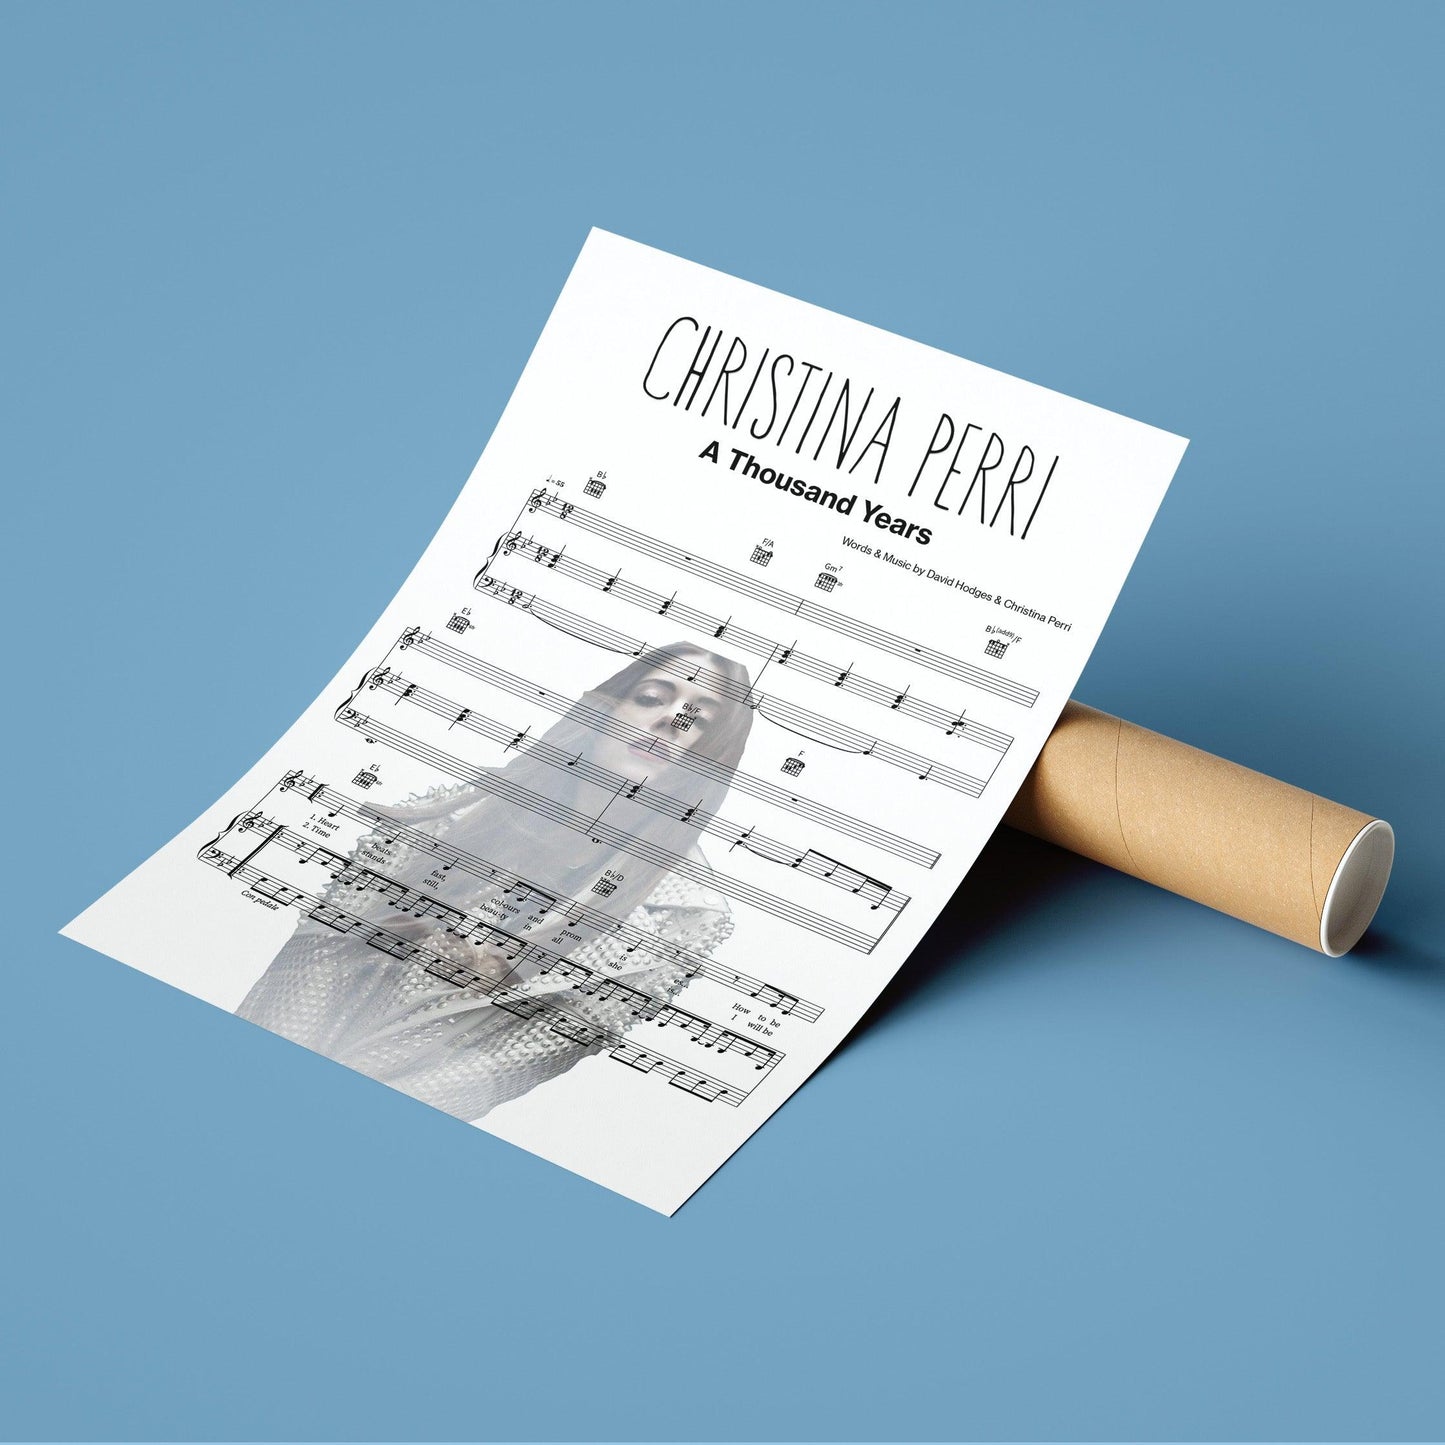 Christina Perri - A Thousand Years | Song Music Sheet Notes Print Everyone has a favorite Song lyric prints and Christina Perri now you can show the score as printed staff. The personal favorite song lyrics art shows the song chosen as the score.